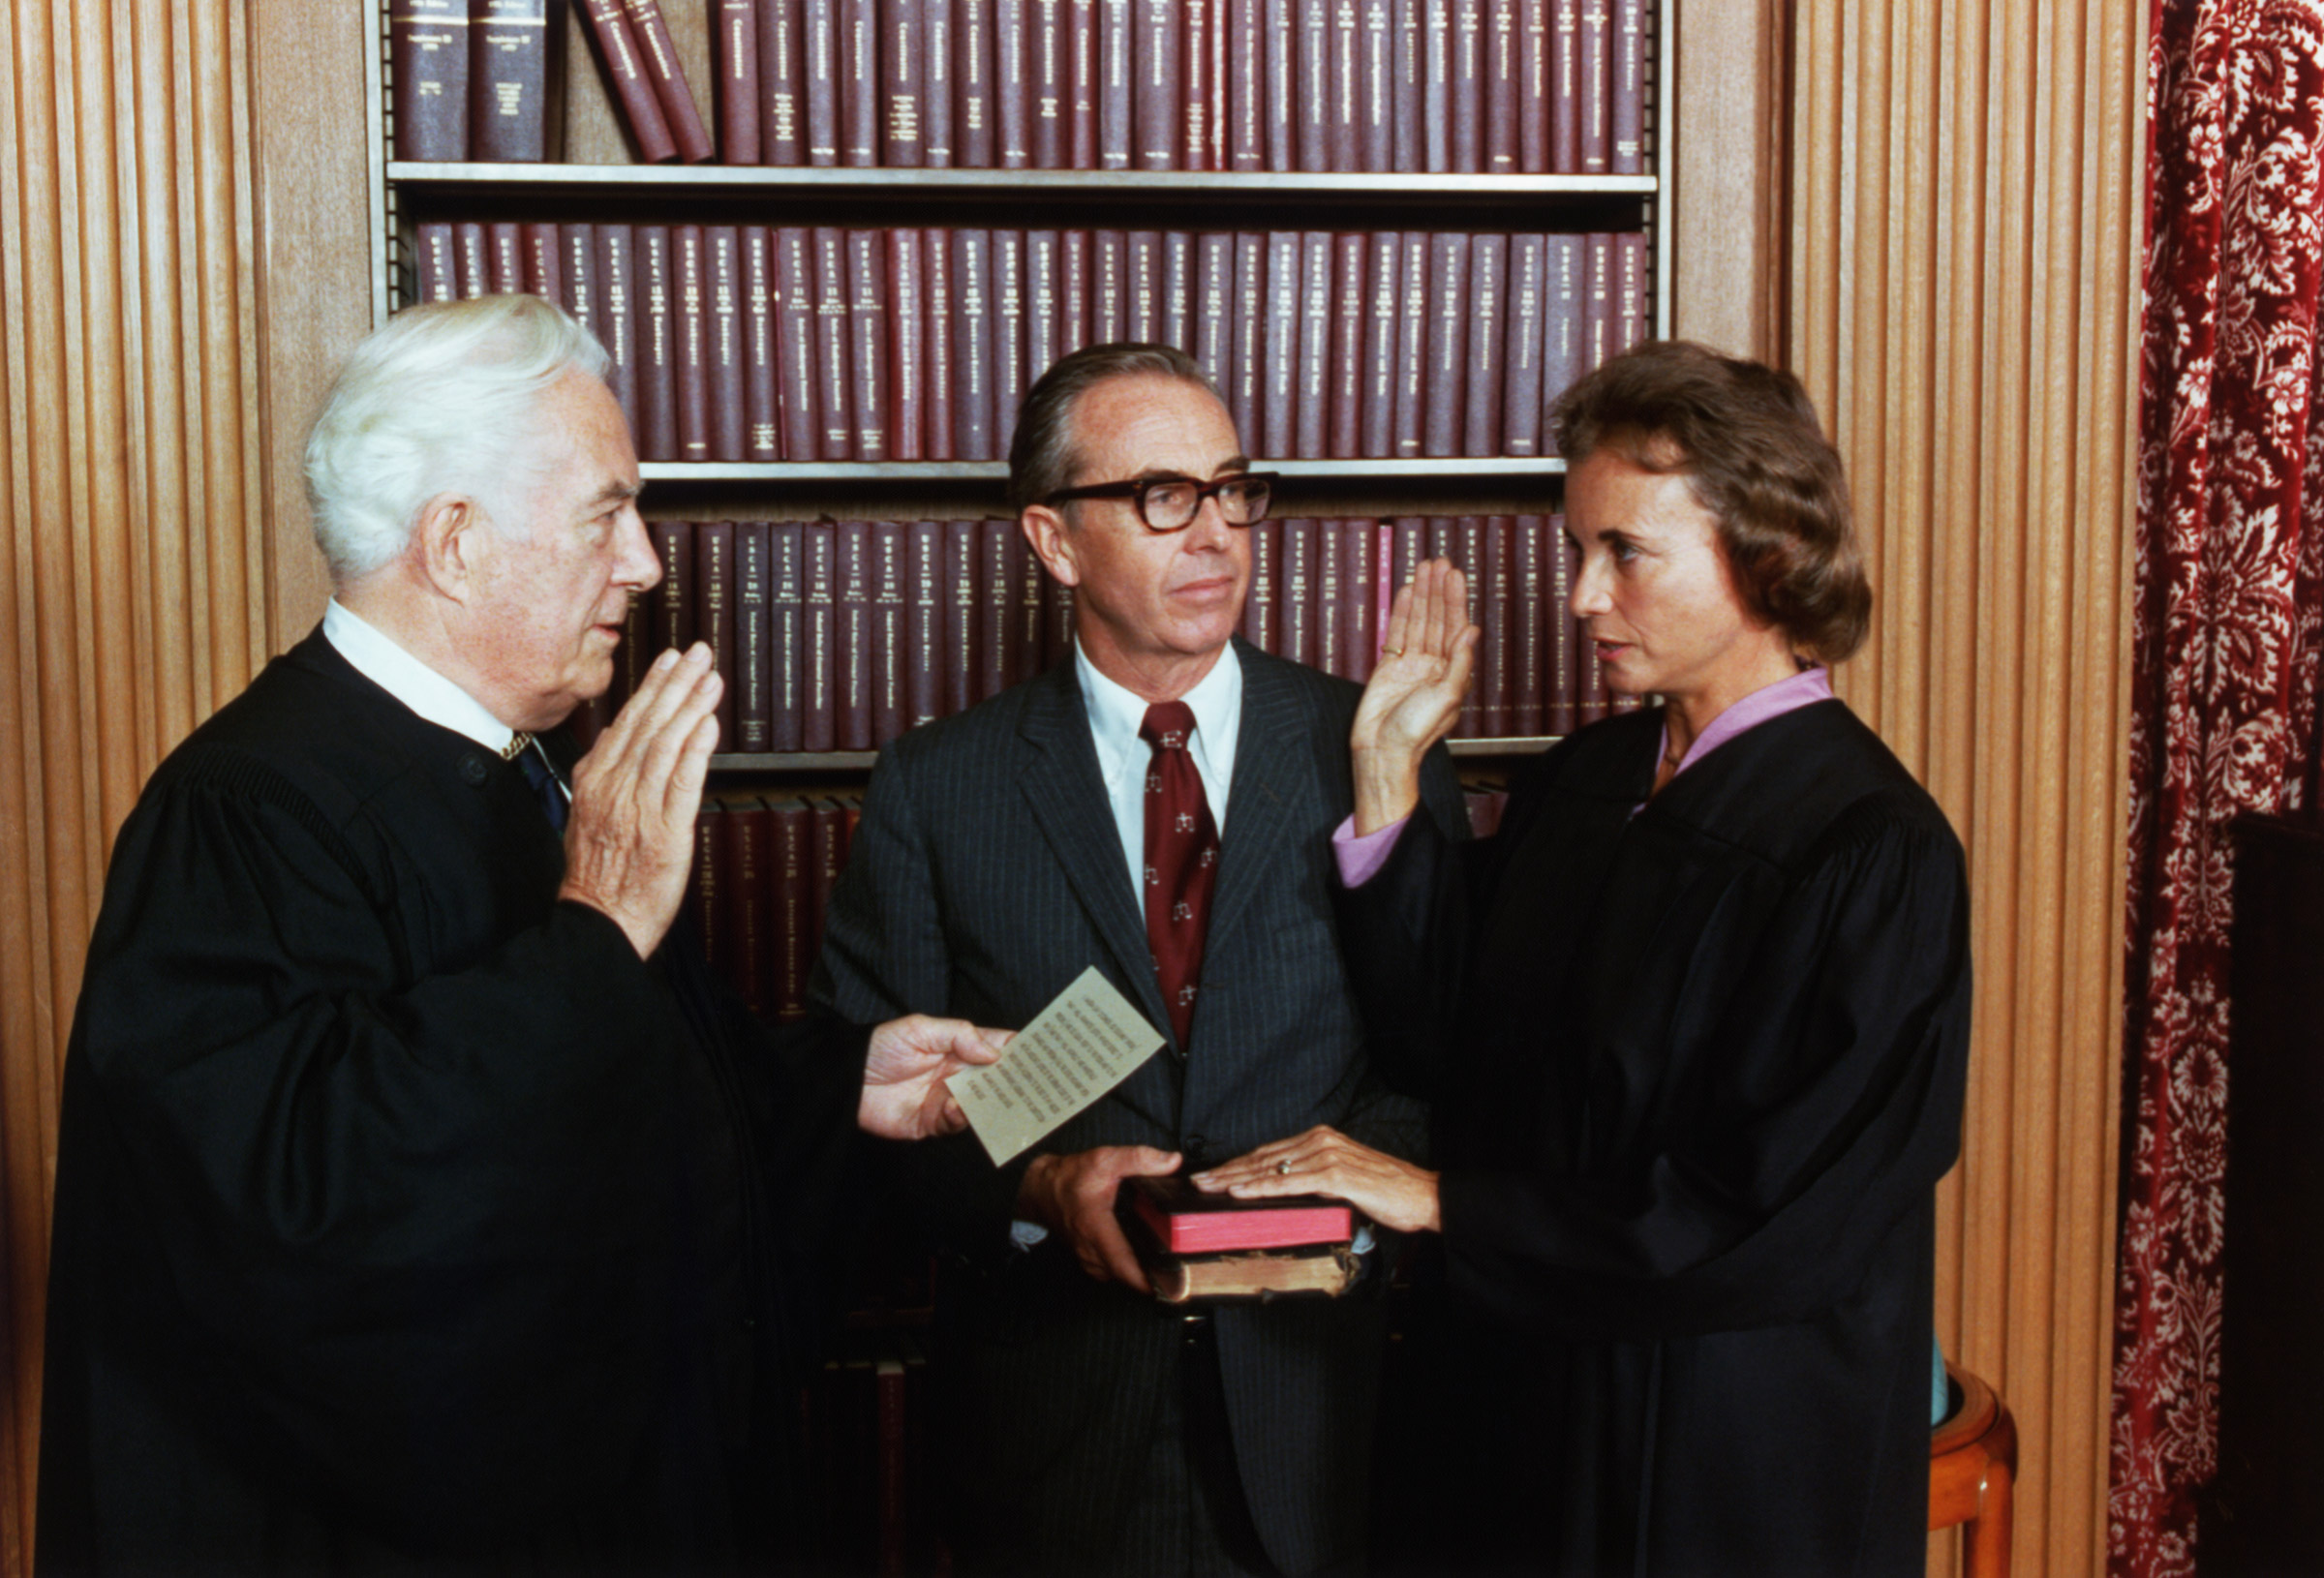 Sandra Day O'Connor is sworn in a Supreme Court Justice by Chief Justice Warren Burger. At center, holding two family Bi